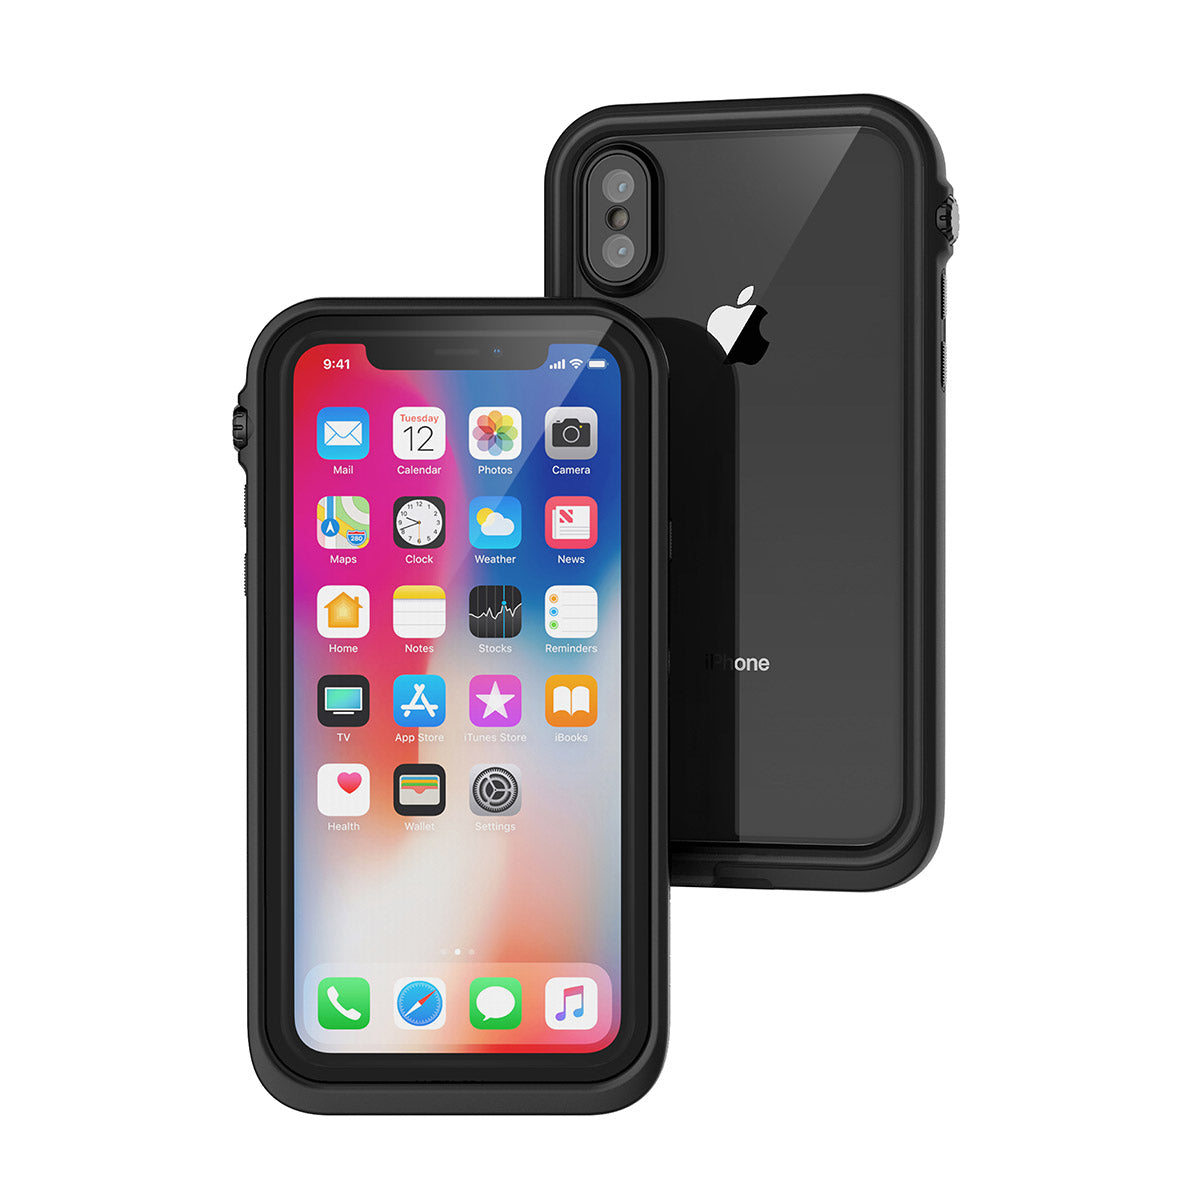 Catalyst iphone x/xr/xs/xs max waterproof case x showing the front and back view of the case in stealth black